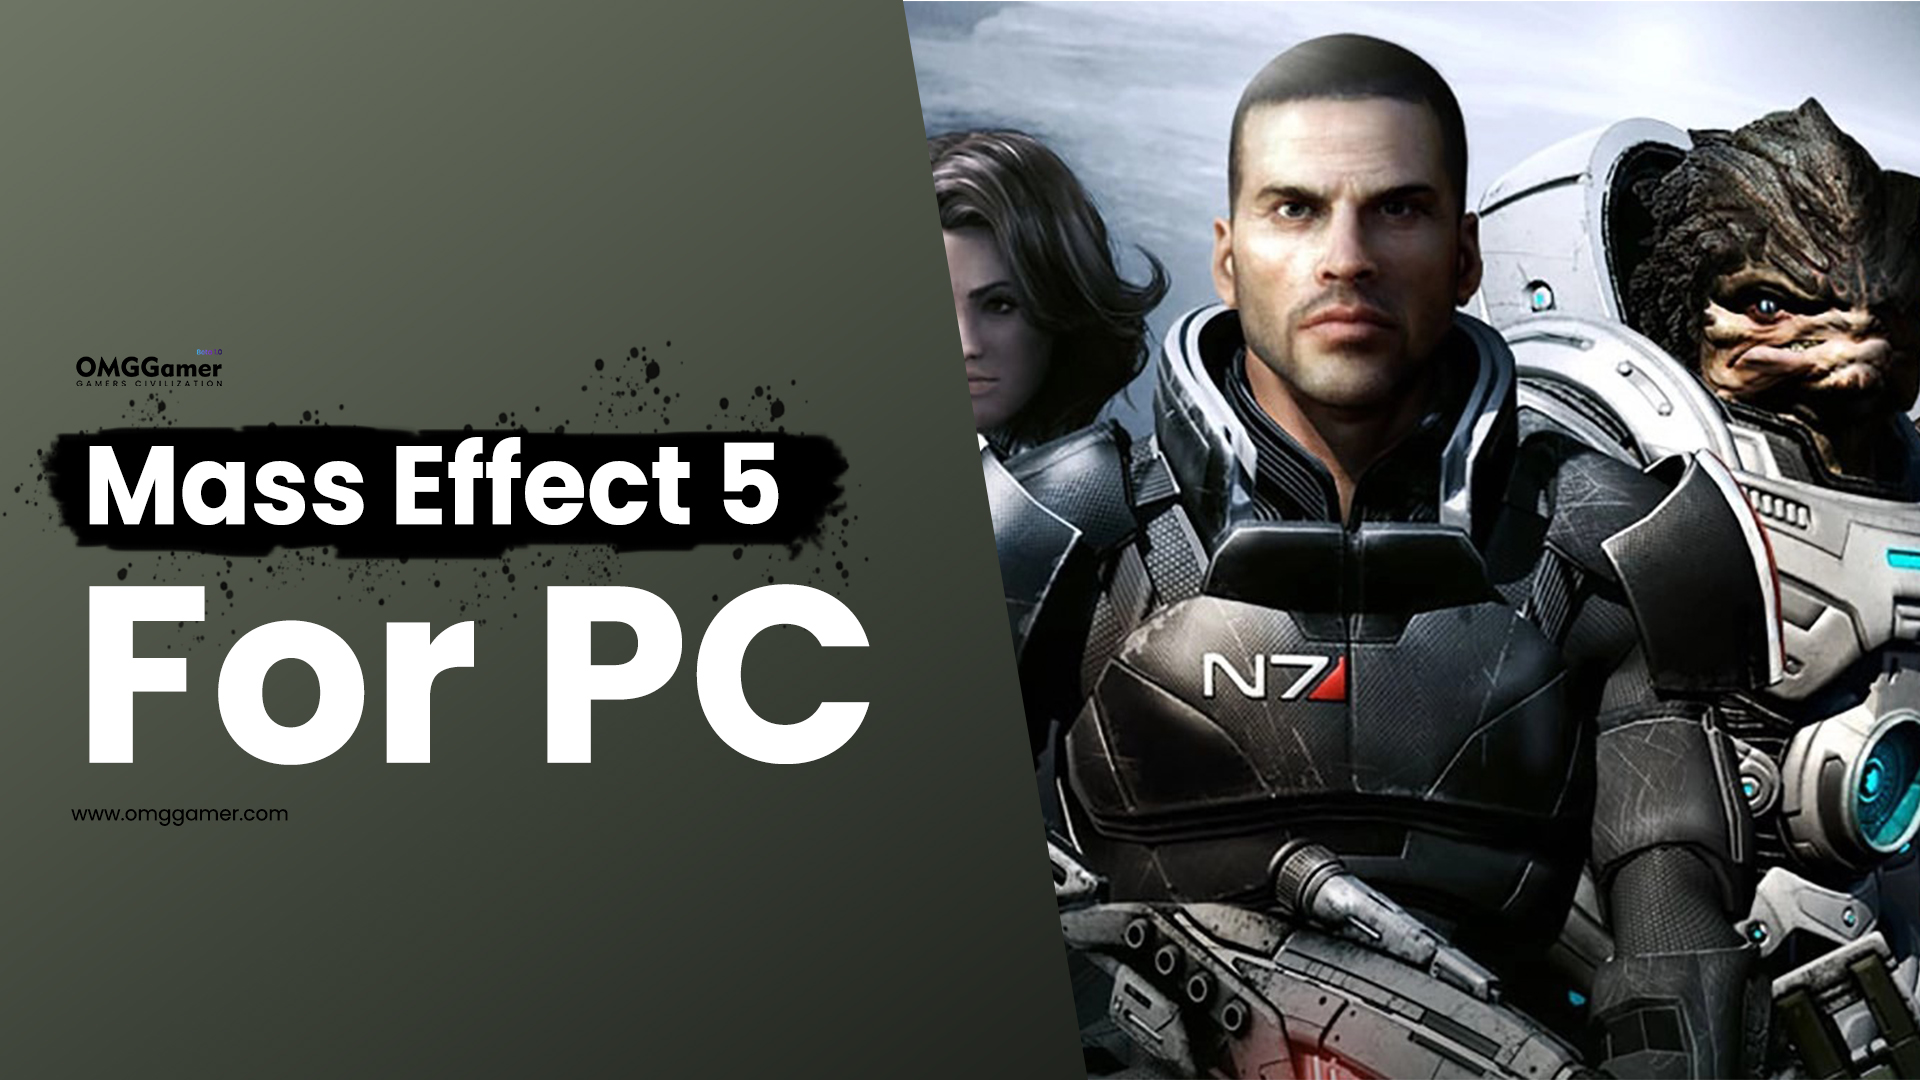 Mass Effect 5 for PC